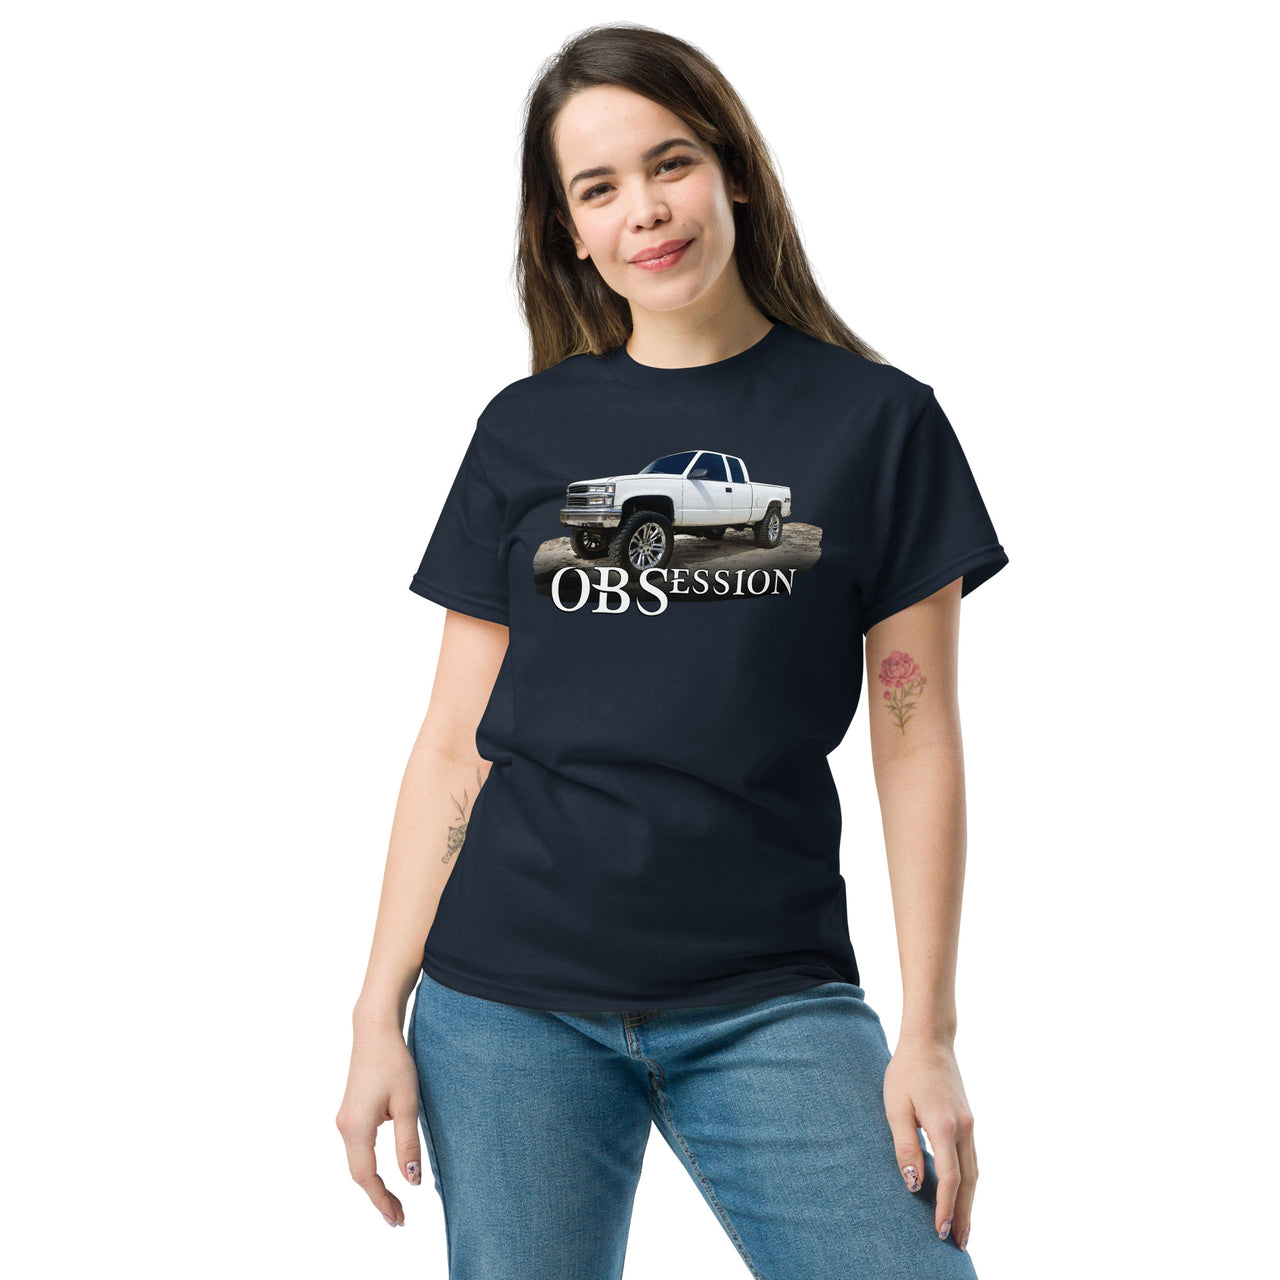 OBS Truck T-Shirt Lifted K1500 modeled in navy